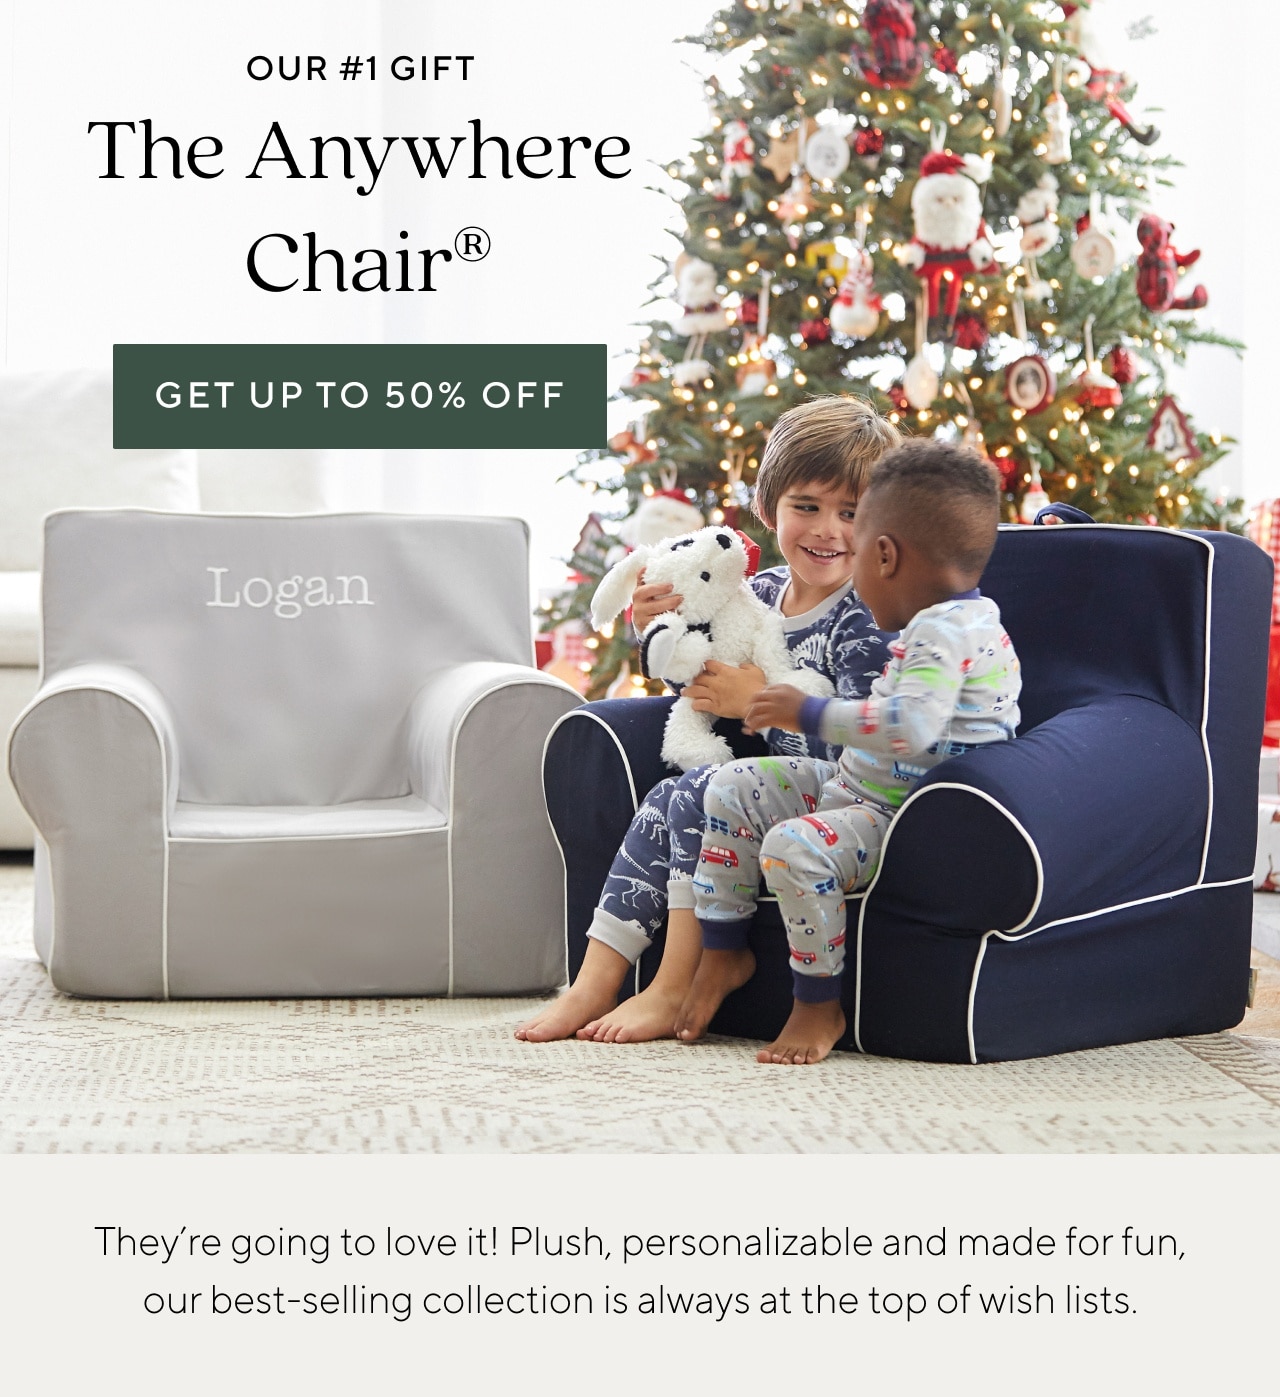 OUR #1 GIFT - THE ANYWHERE CHAIR